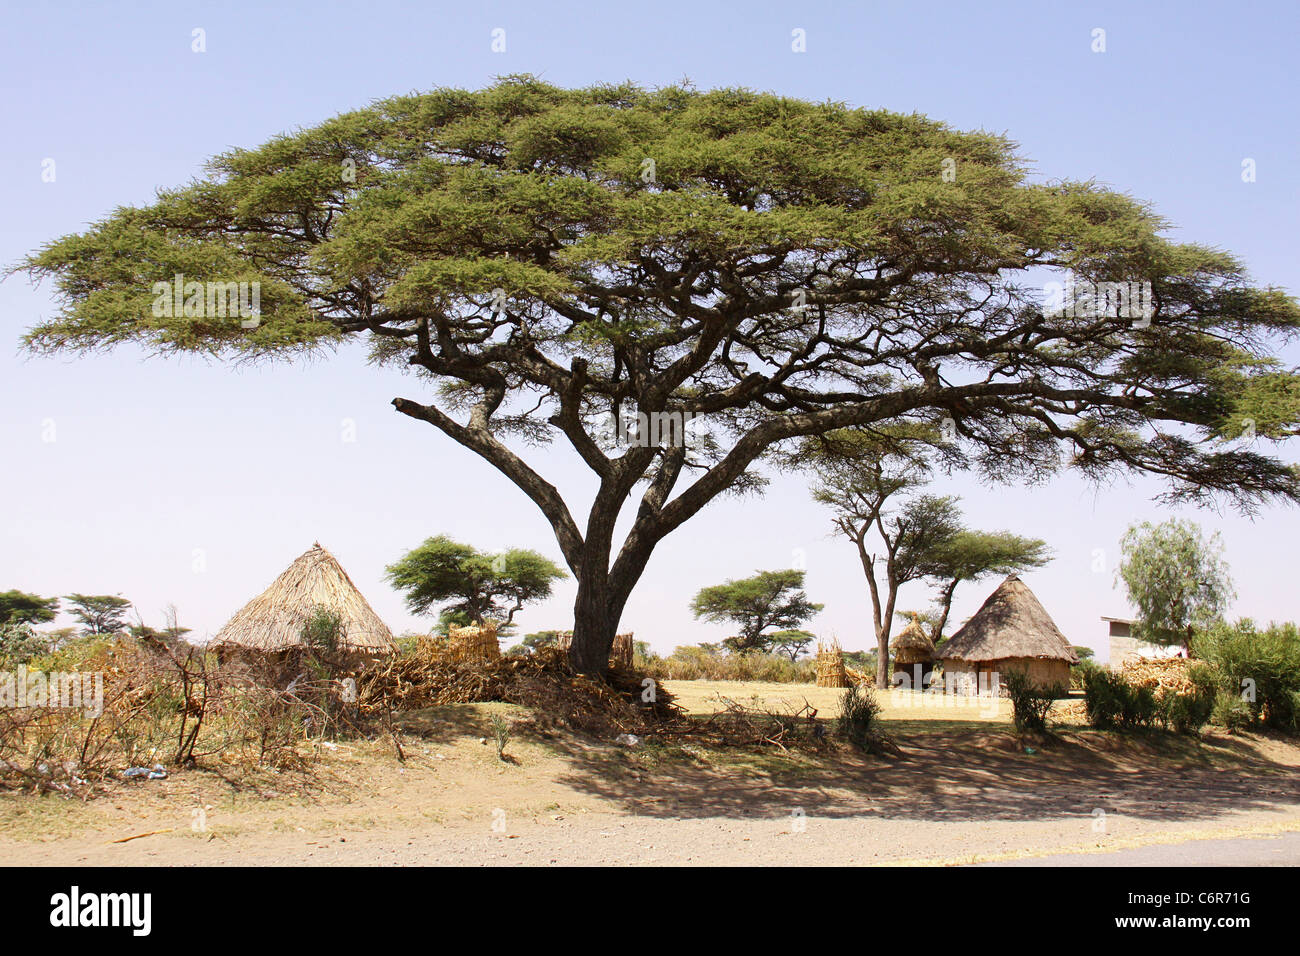 A large, tall Acacia tree with a widespread canopy shading the ground near traditional huts in Ethiopia Stock Photo